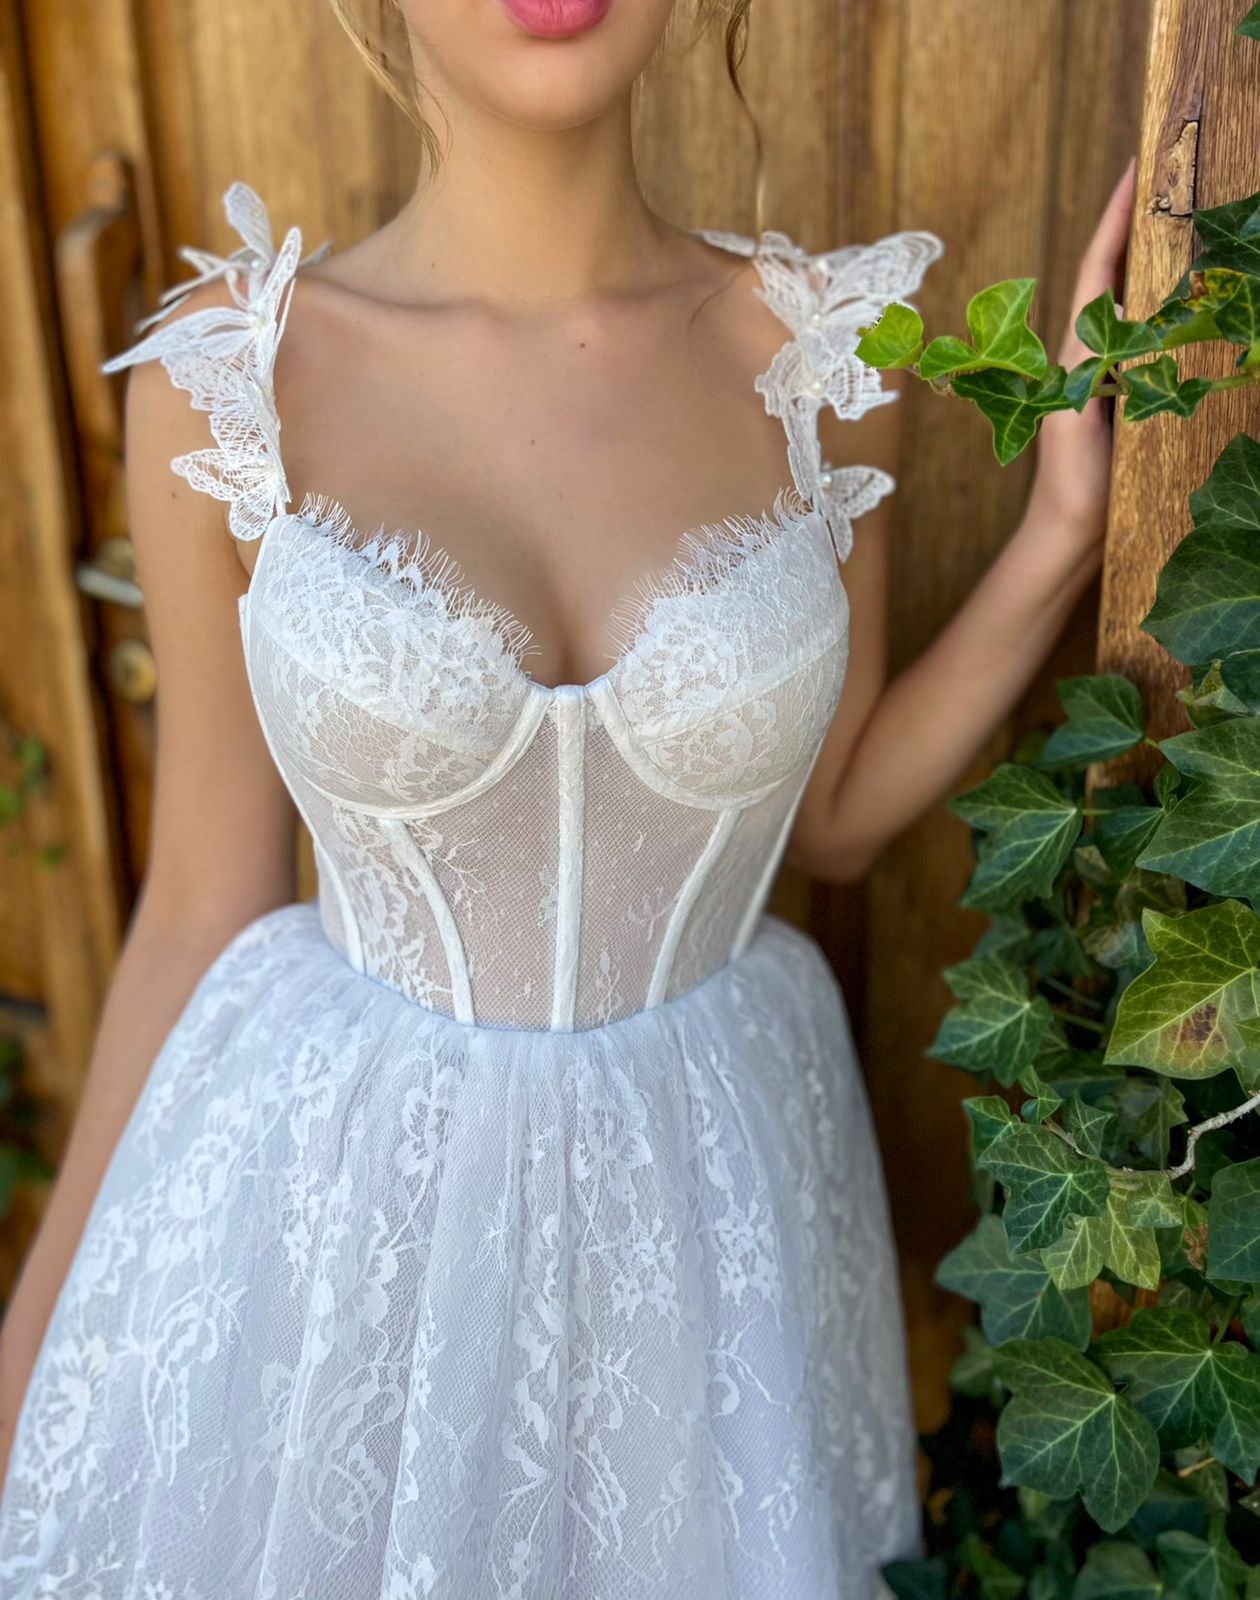 White mini dress with spaghetti straps, embroidery and butterflies